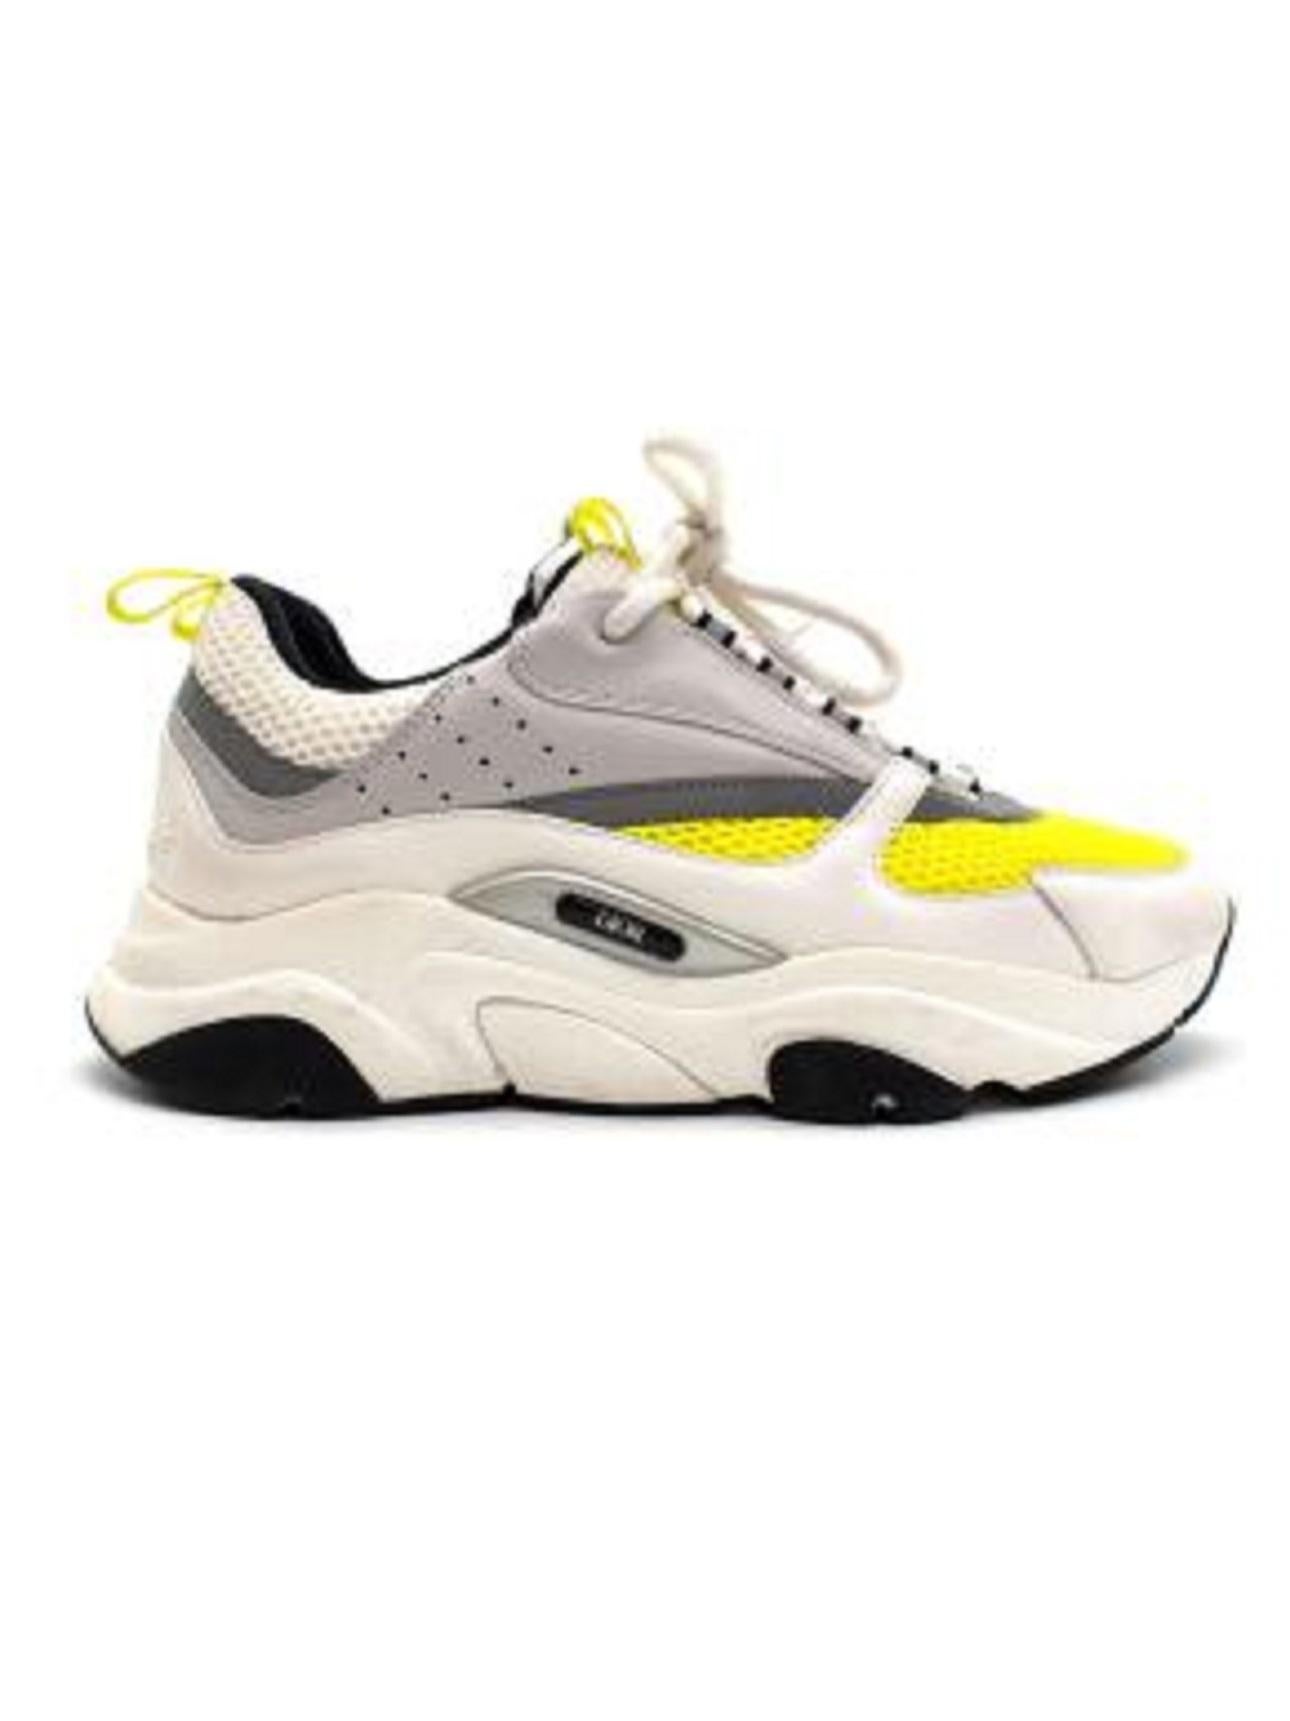 Dior Yellow & White B22 Sneakers In Good Condition For Sale In London, GB